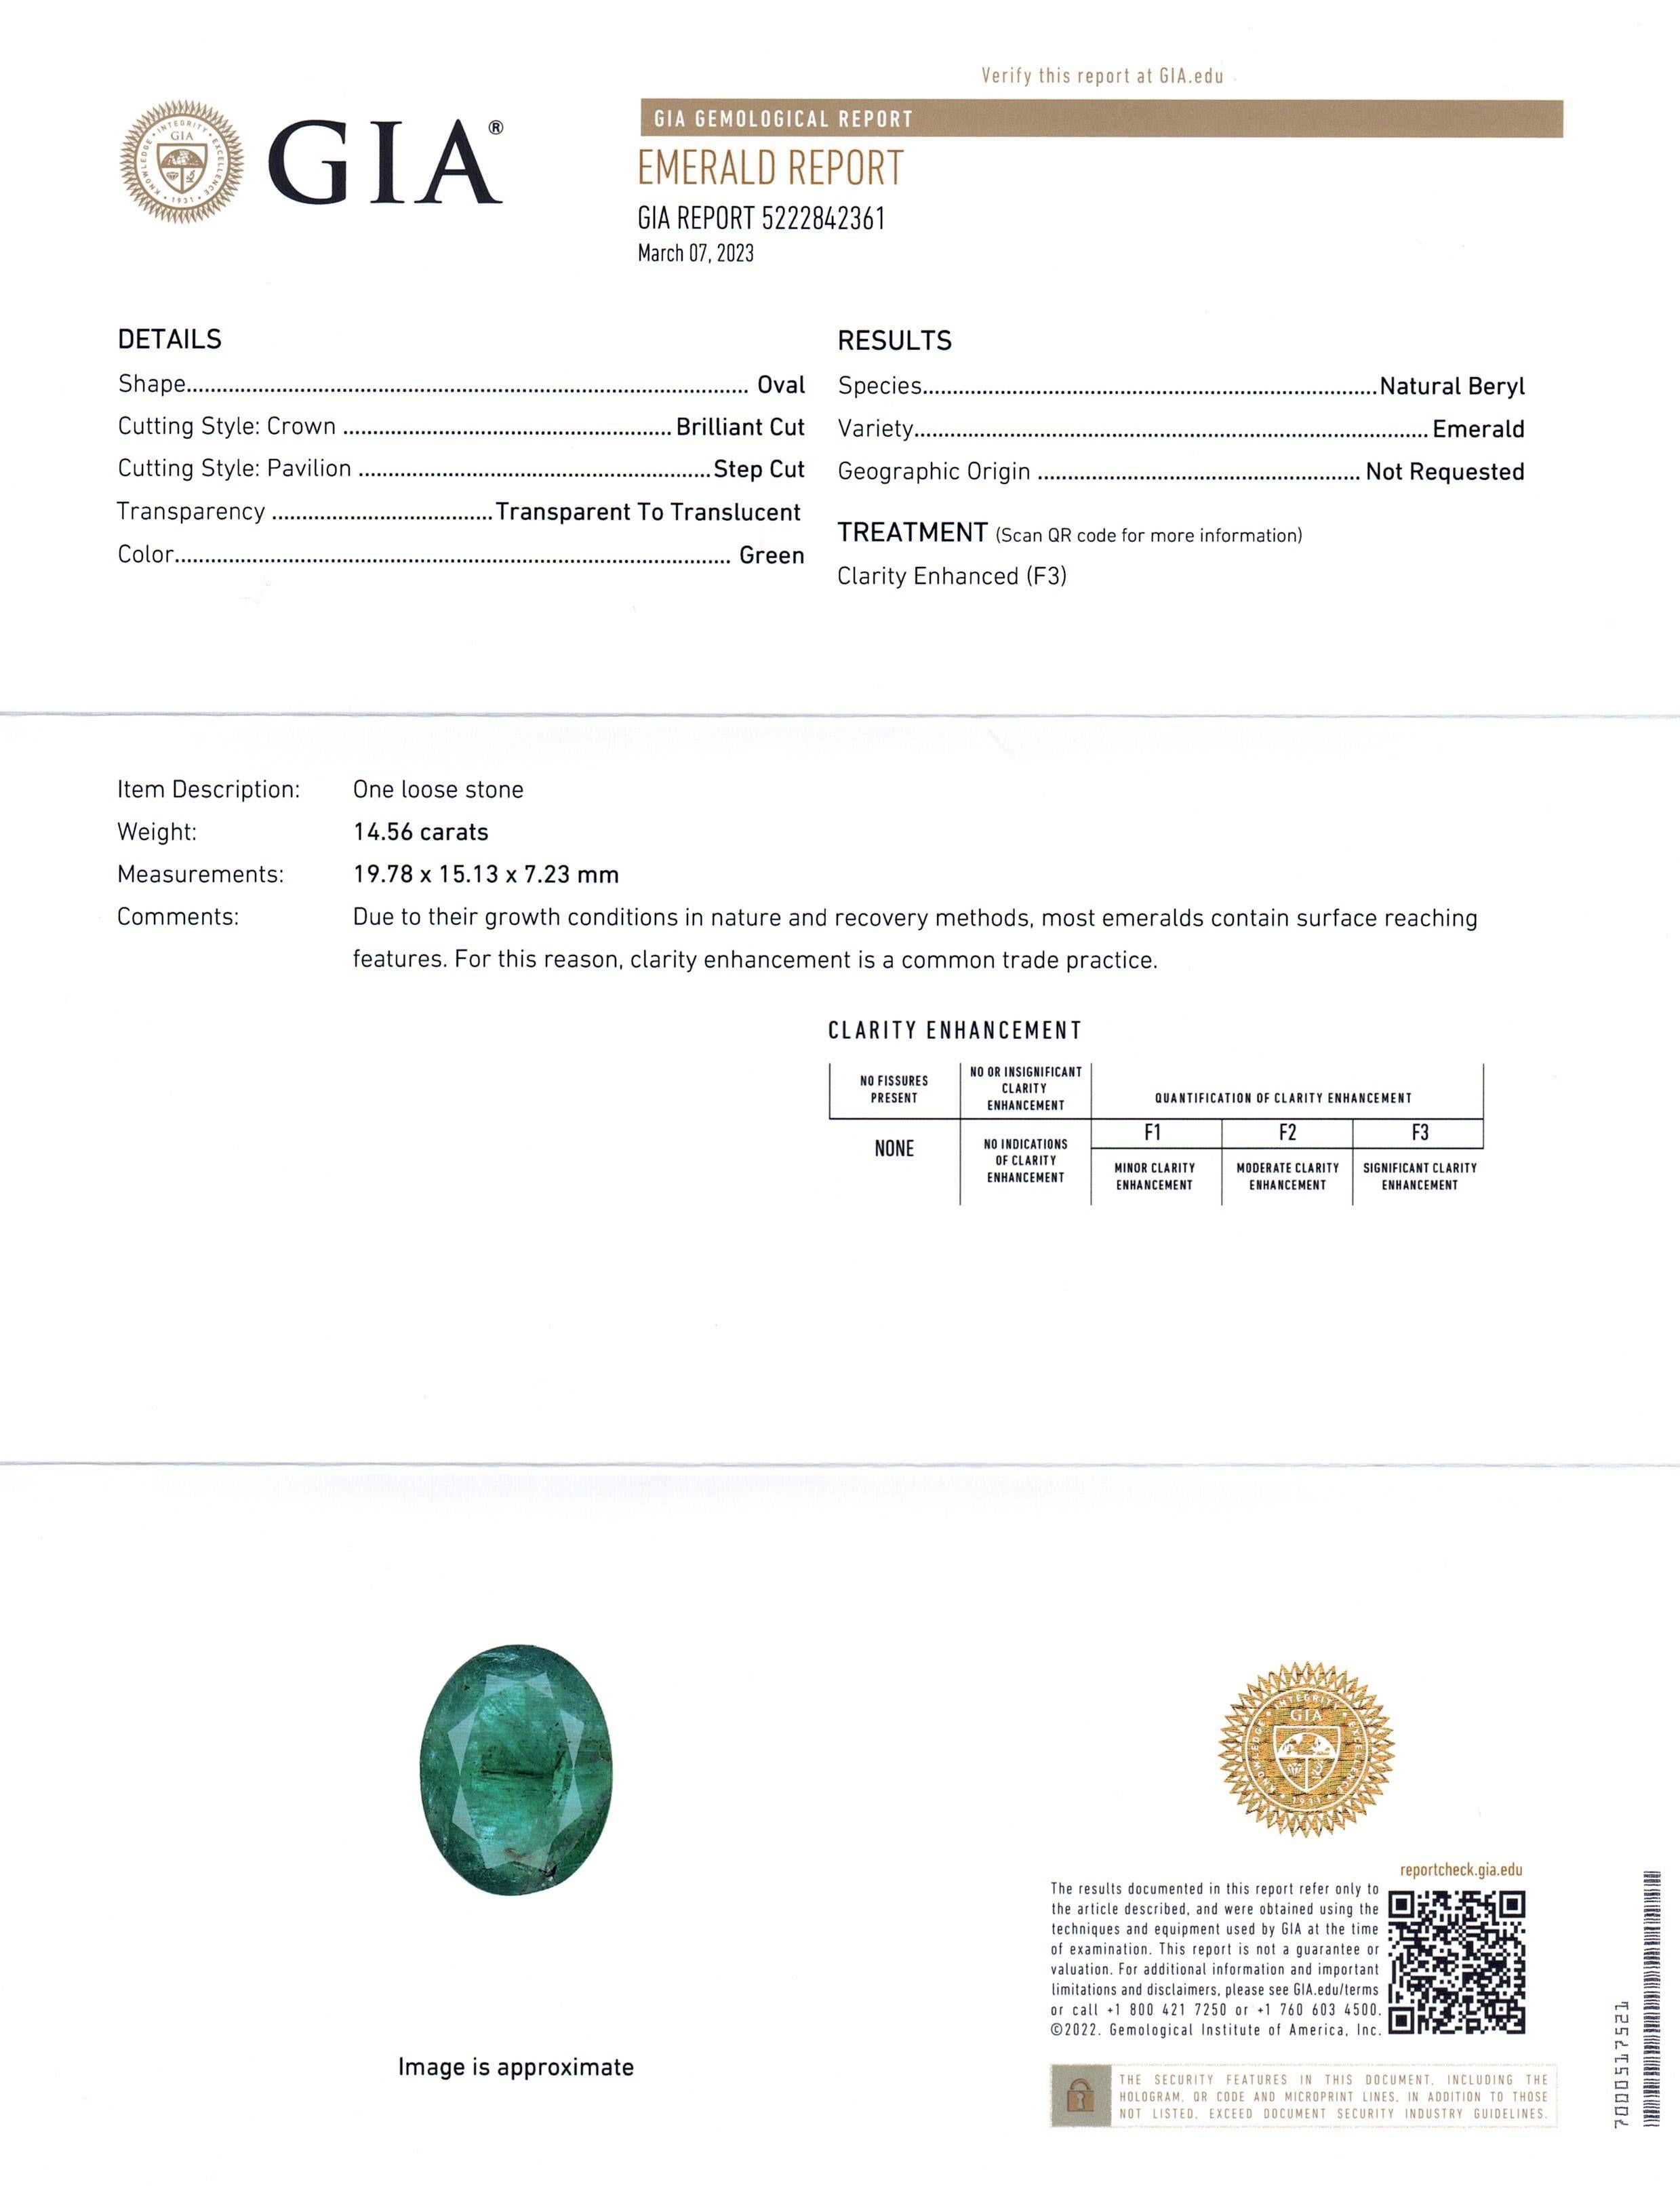 This is a stunning GIA Certified Emerald


The GIA report reads as follows:

GIA Report Number: 5222842361
Shape: Oval
Cutting Style:
Cutting Style: Crown: Brilliant Cut
Cutting Style: Pavilion: Step Cut
Transparency: Transparent to